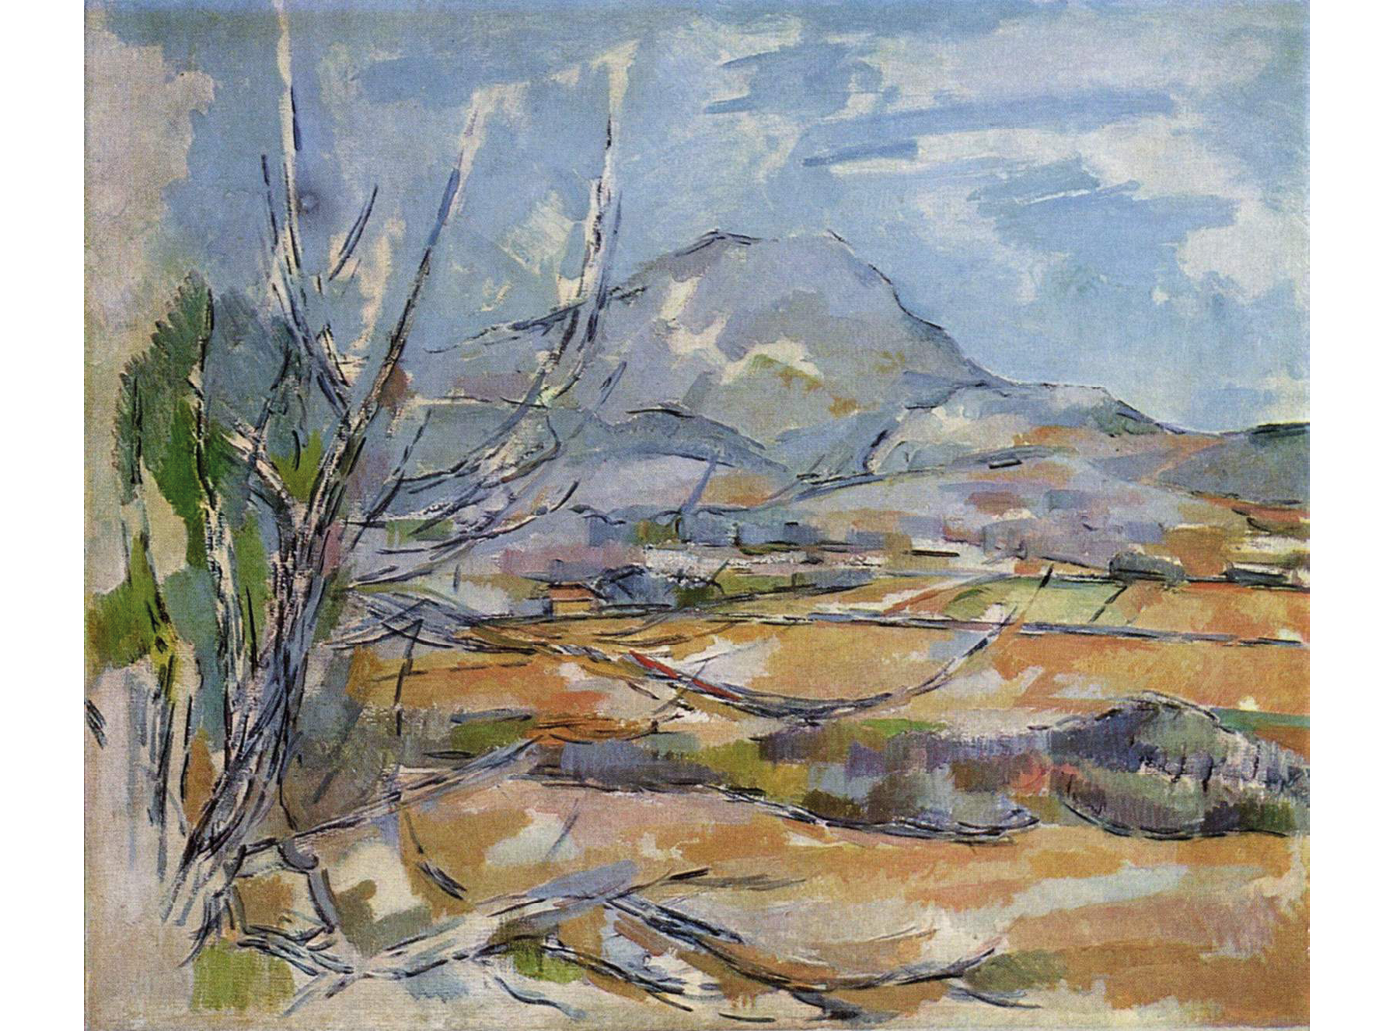 A painting of Mont Sainte-Victoire ca. 1885 -1887: shows valleys and plains; in the distance a large mountain and a partly cloudy blue sky; on the far left side, a tree branch comes into view.